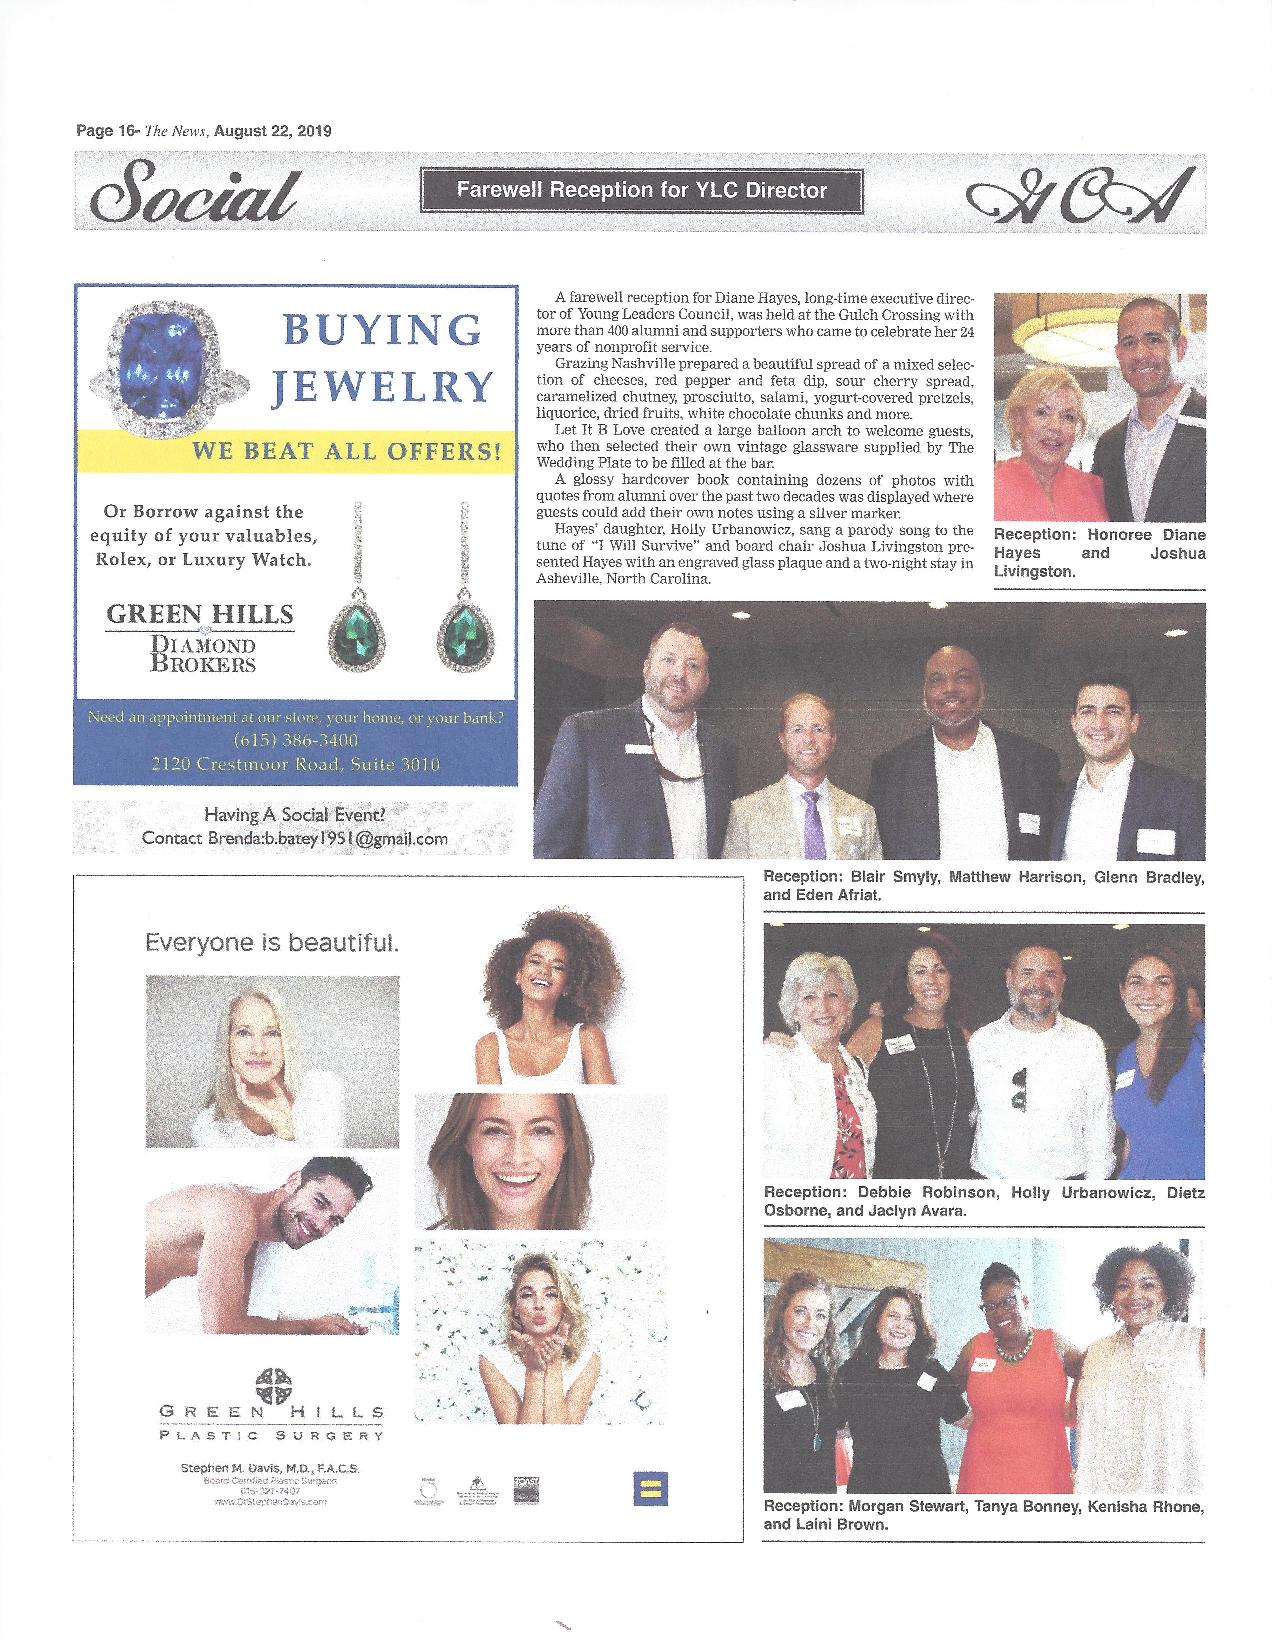 Photos from Diane Hayes’ Farewell Reception Published in 8-22-19 Issue of Green Hills News/Nashville Today